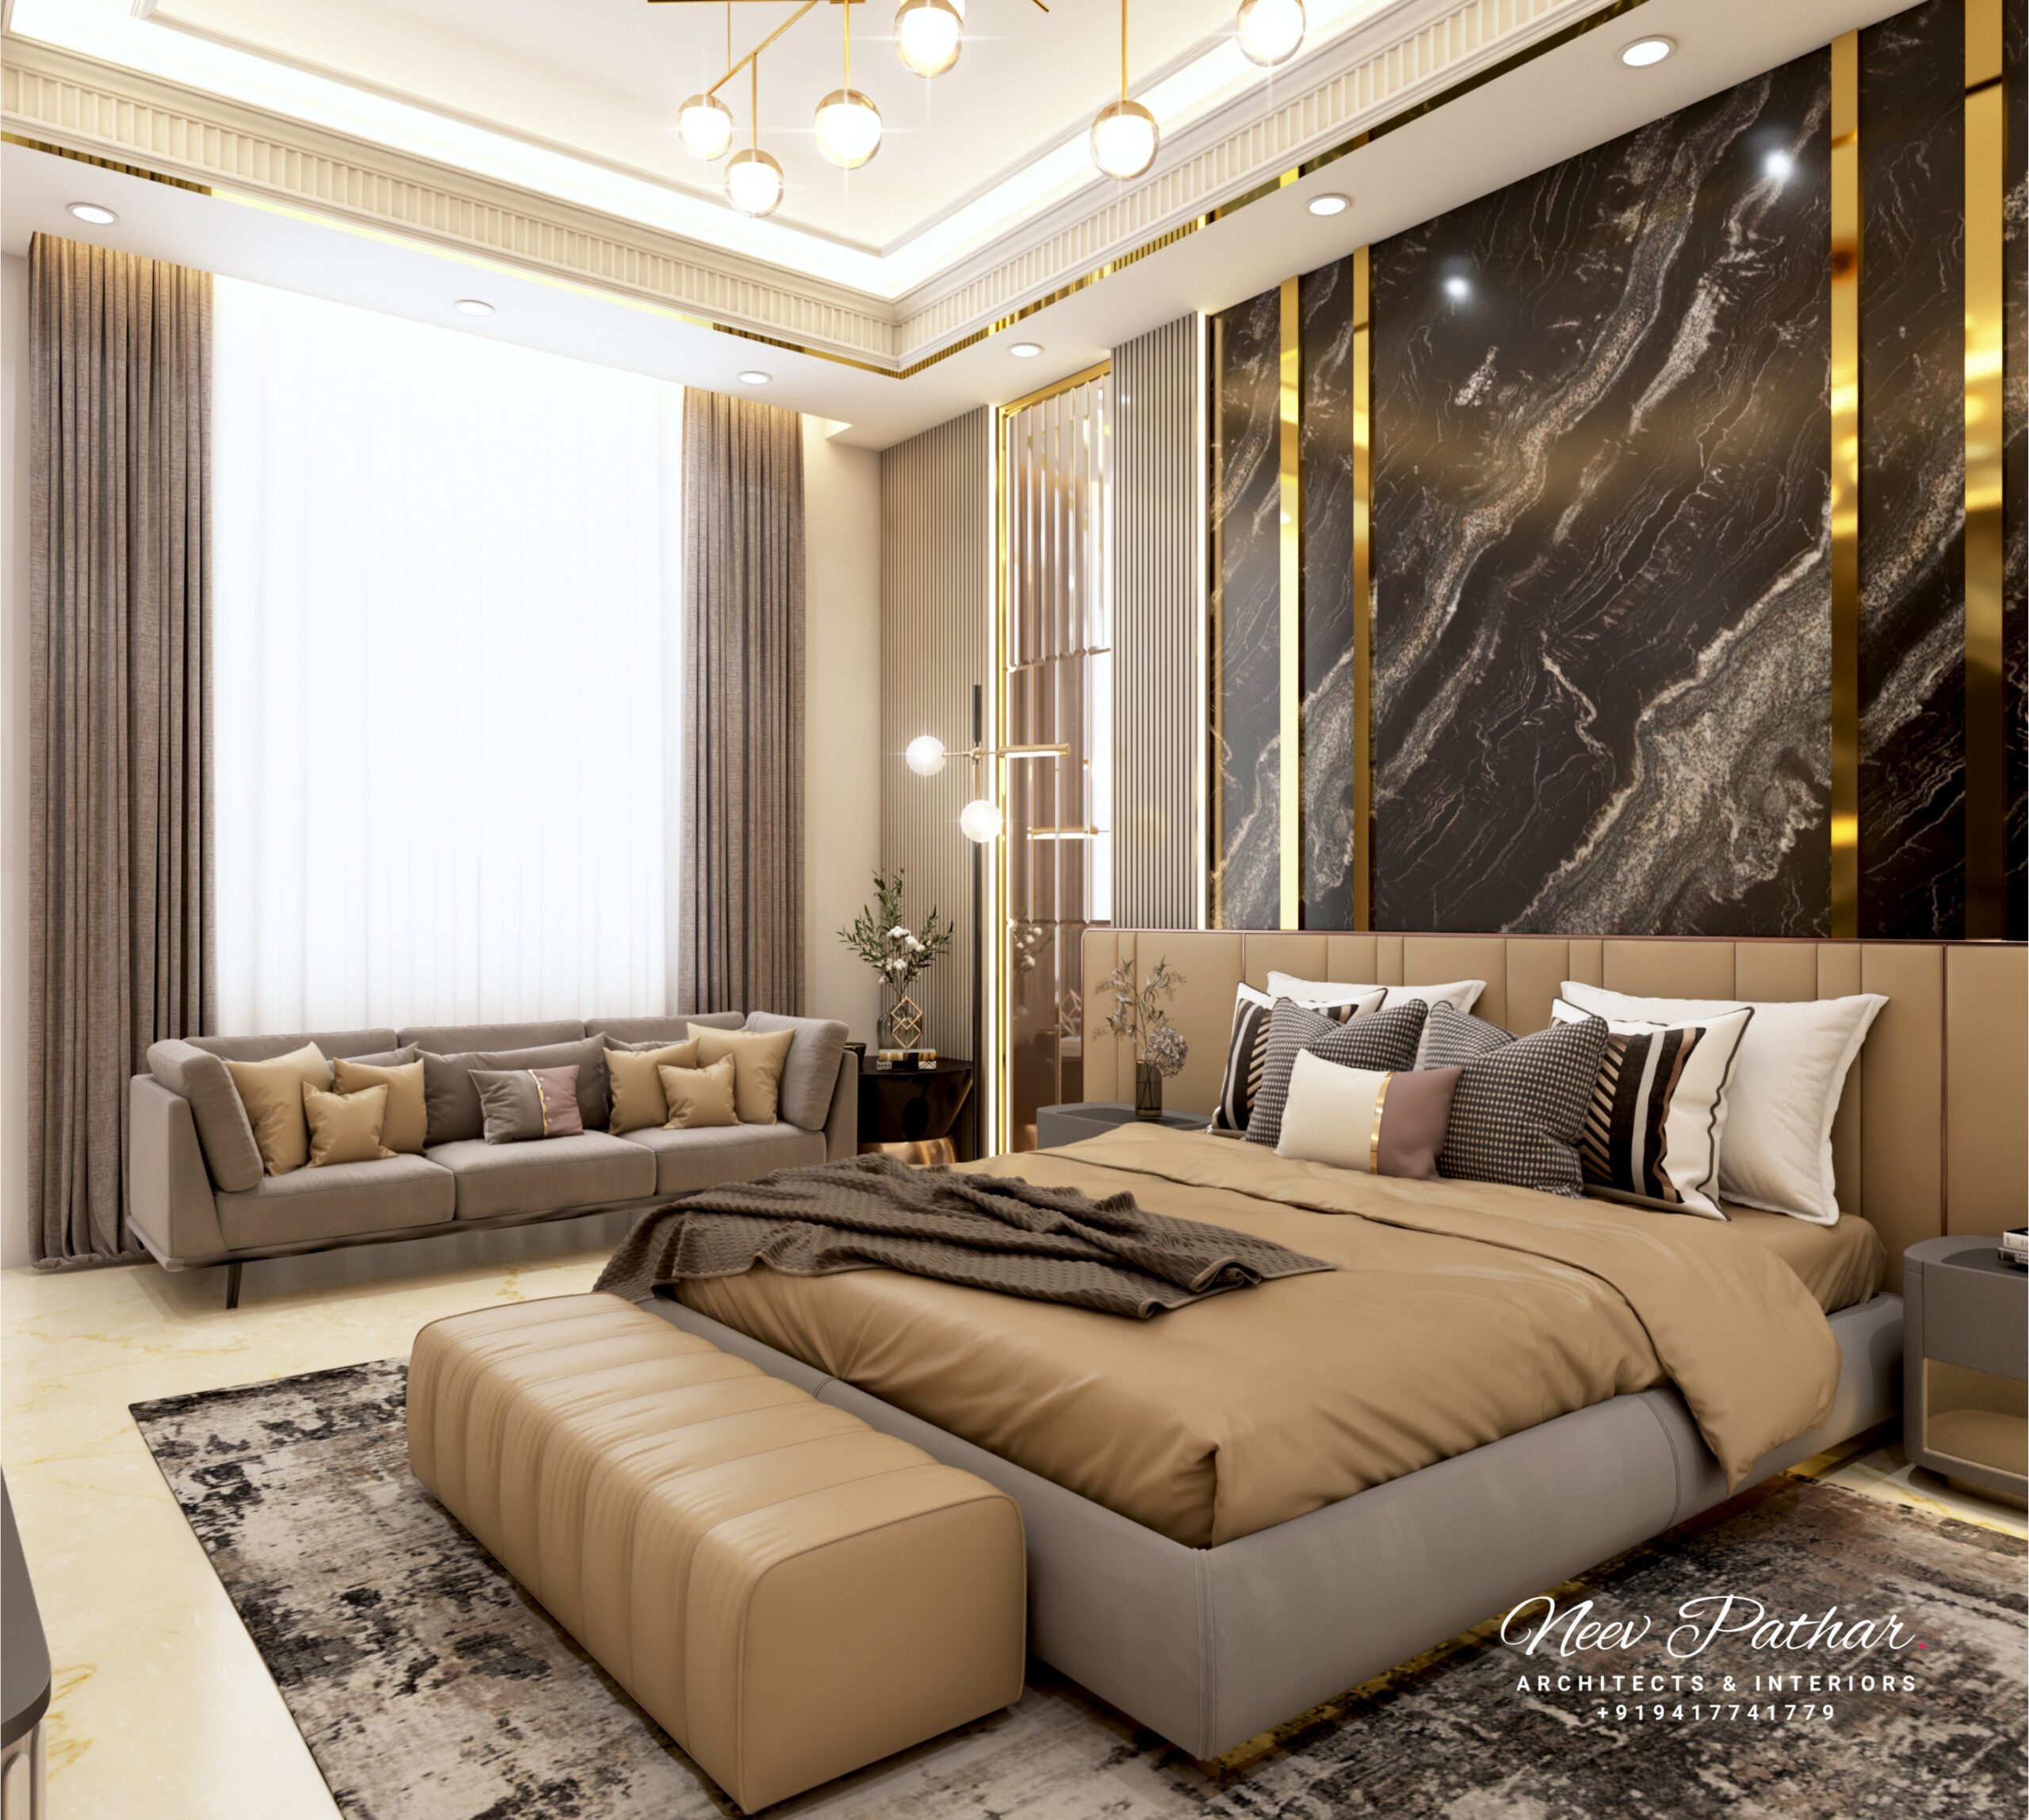 Luxurious Bedroom Design with Camel Brown & Gold Color Scheme, Dark Marble Back Wall, and Dazzling Chandelier in Ludhiana by Neev Pathar Architects & Interior Designers.